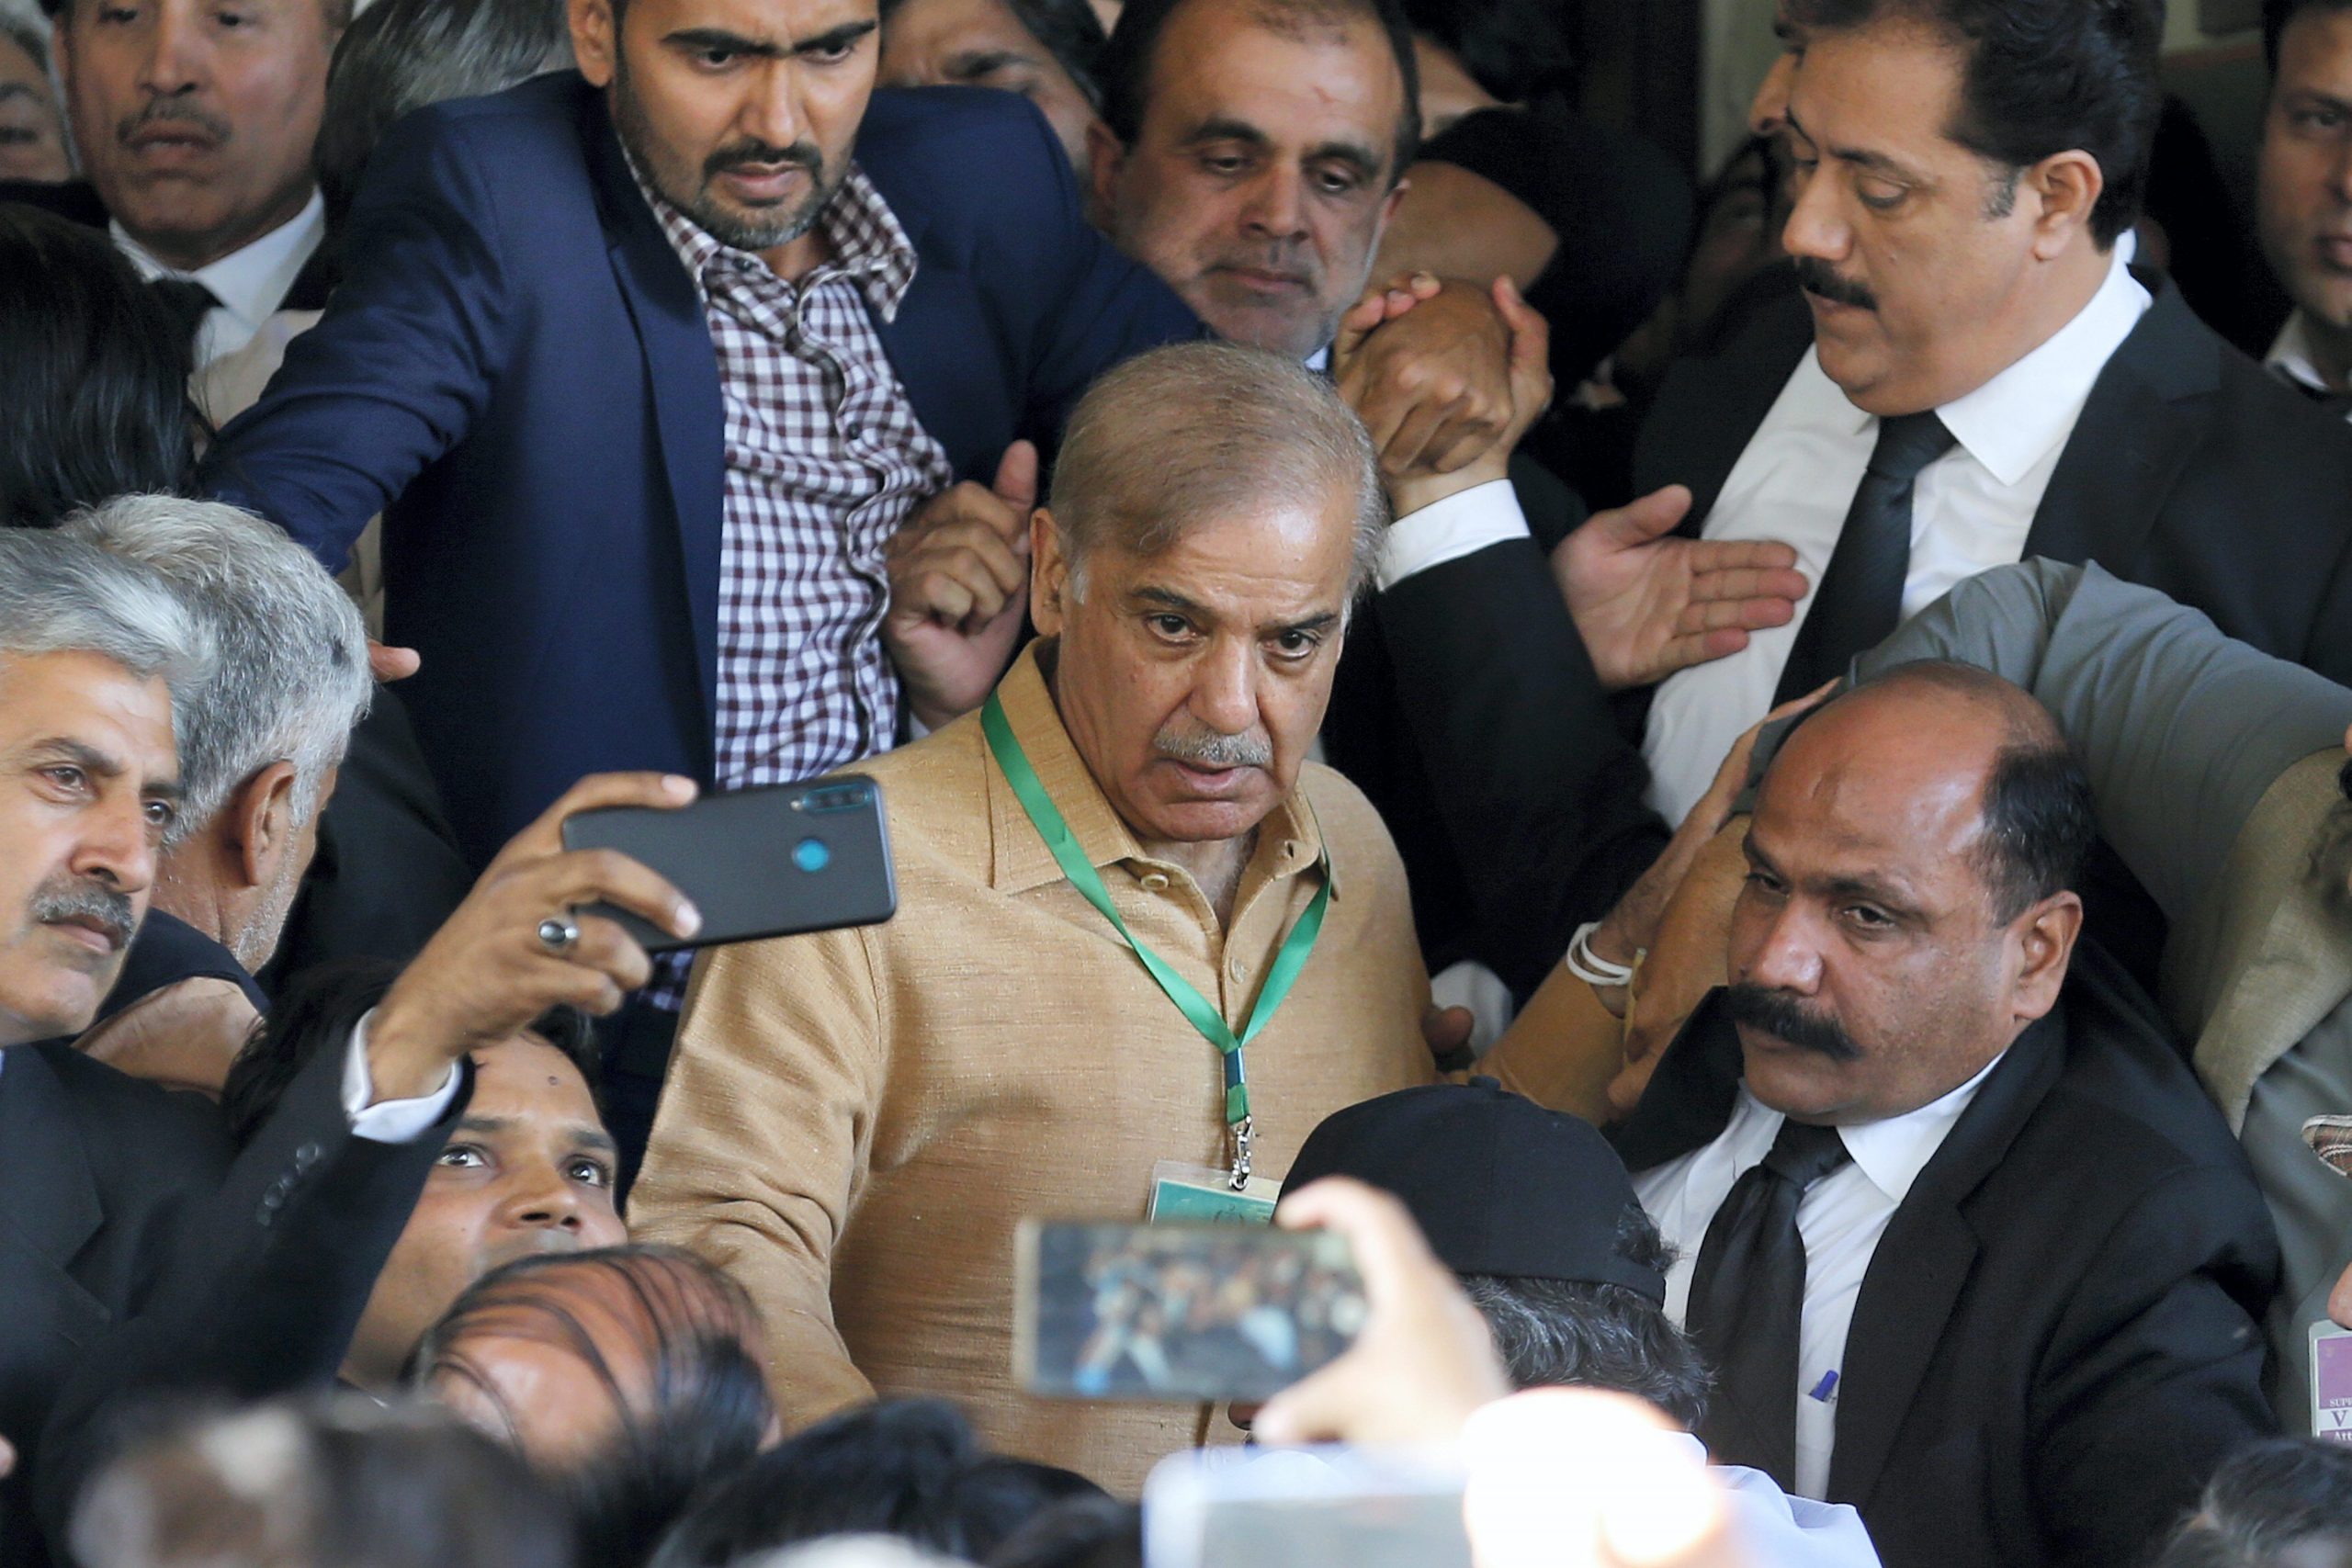 Opposition PM face Shehbaz Sharif: Peace with India not possible if Kashmir issue persists